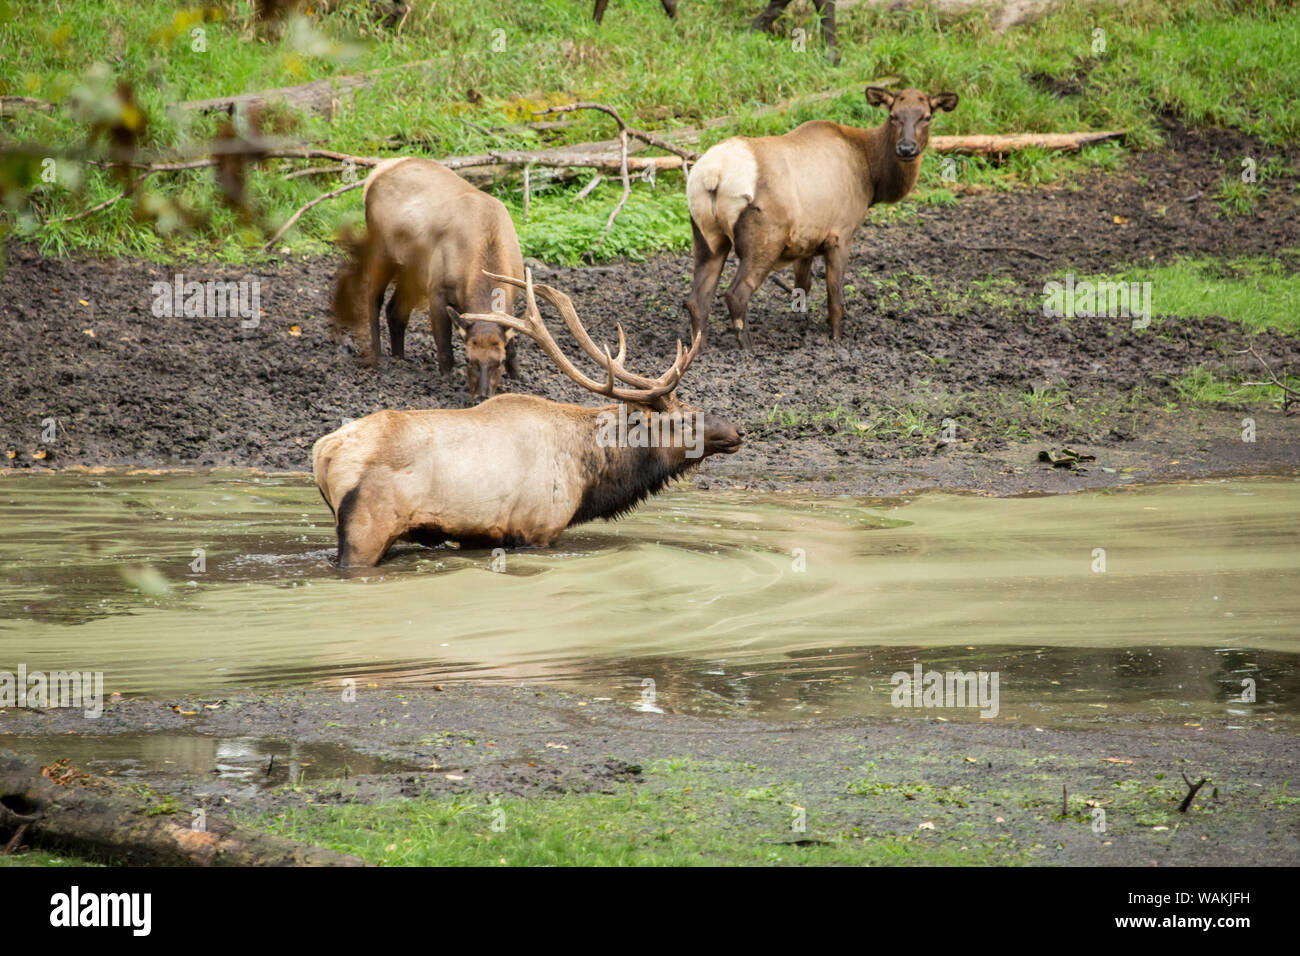 Eatonville, Washington State, USA. American elk bull wading in a muddy stream while the does stand knee-deep in mud, in Northwest Trek Wildlife Park. Stock Photo